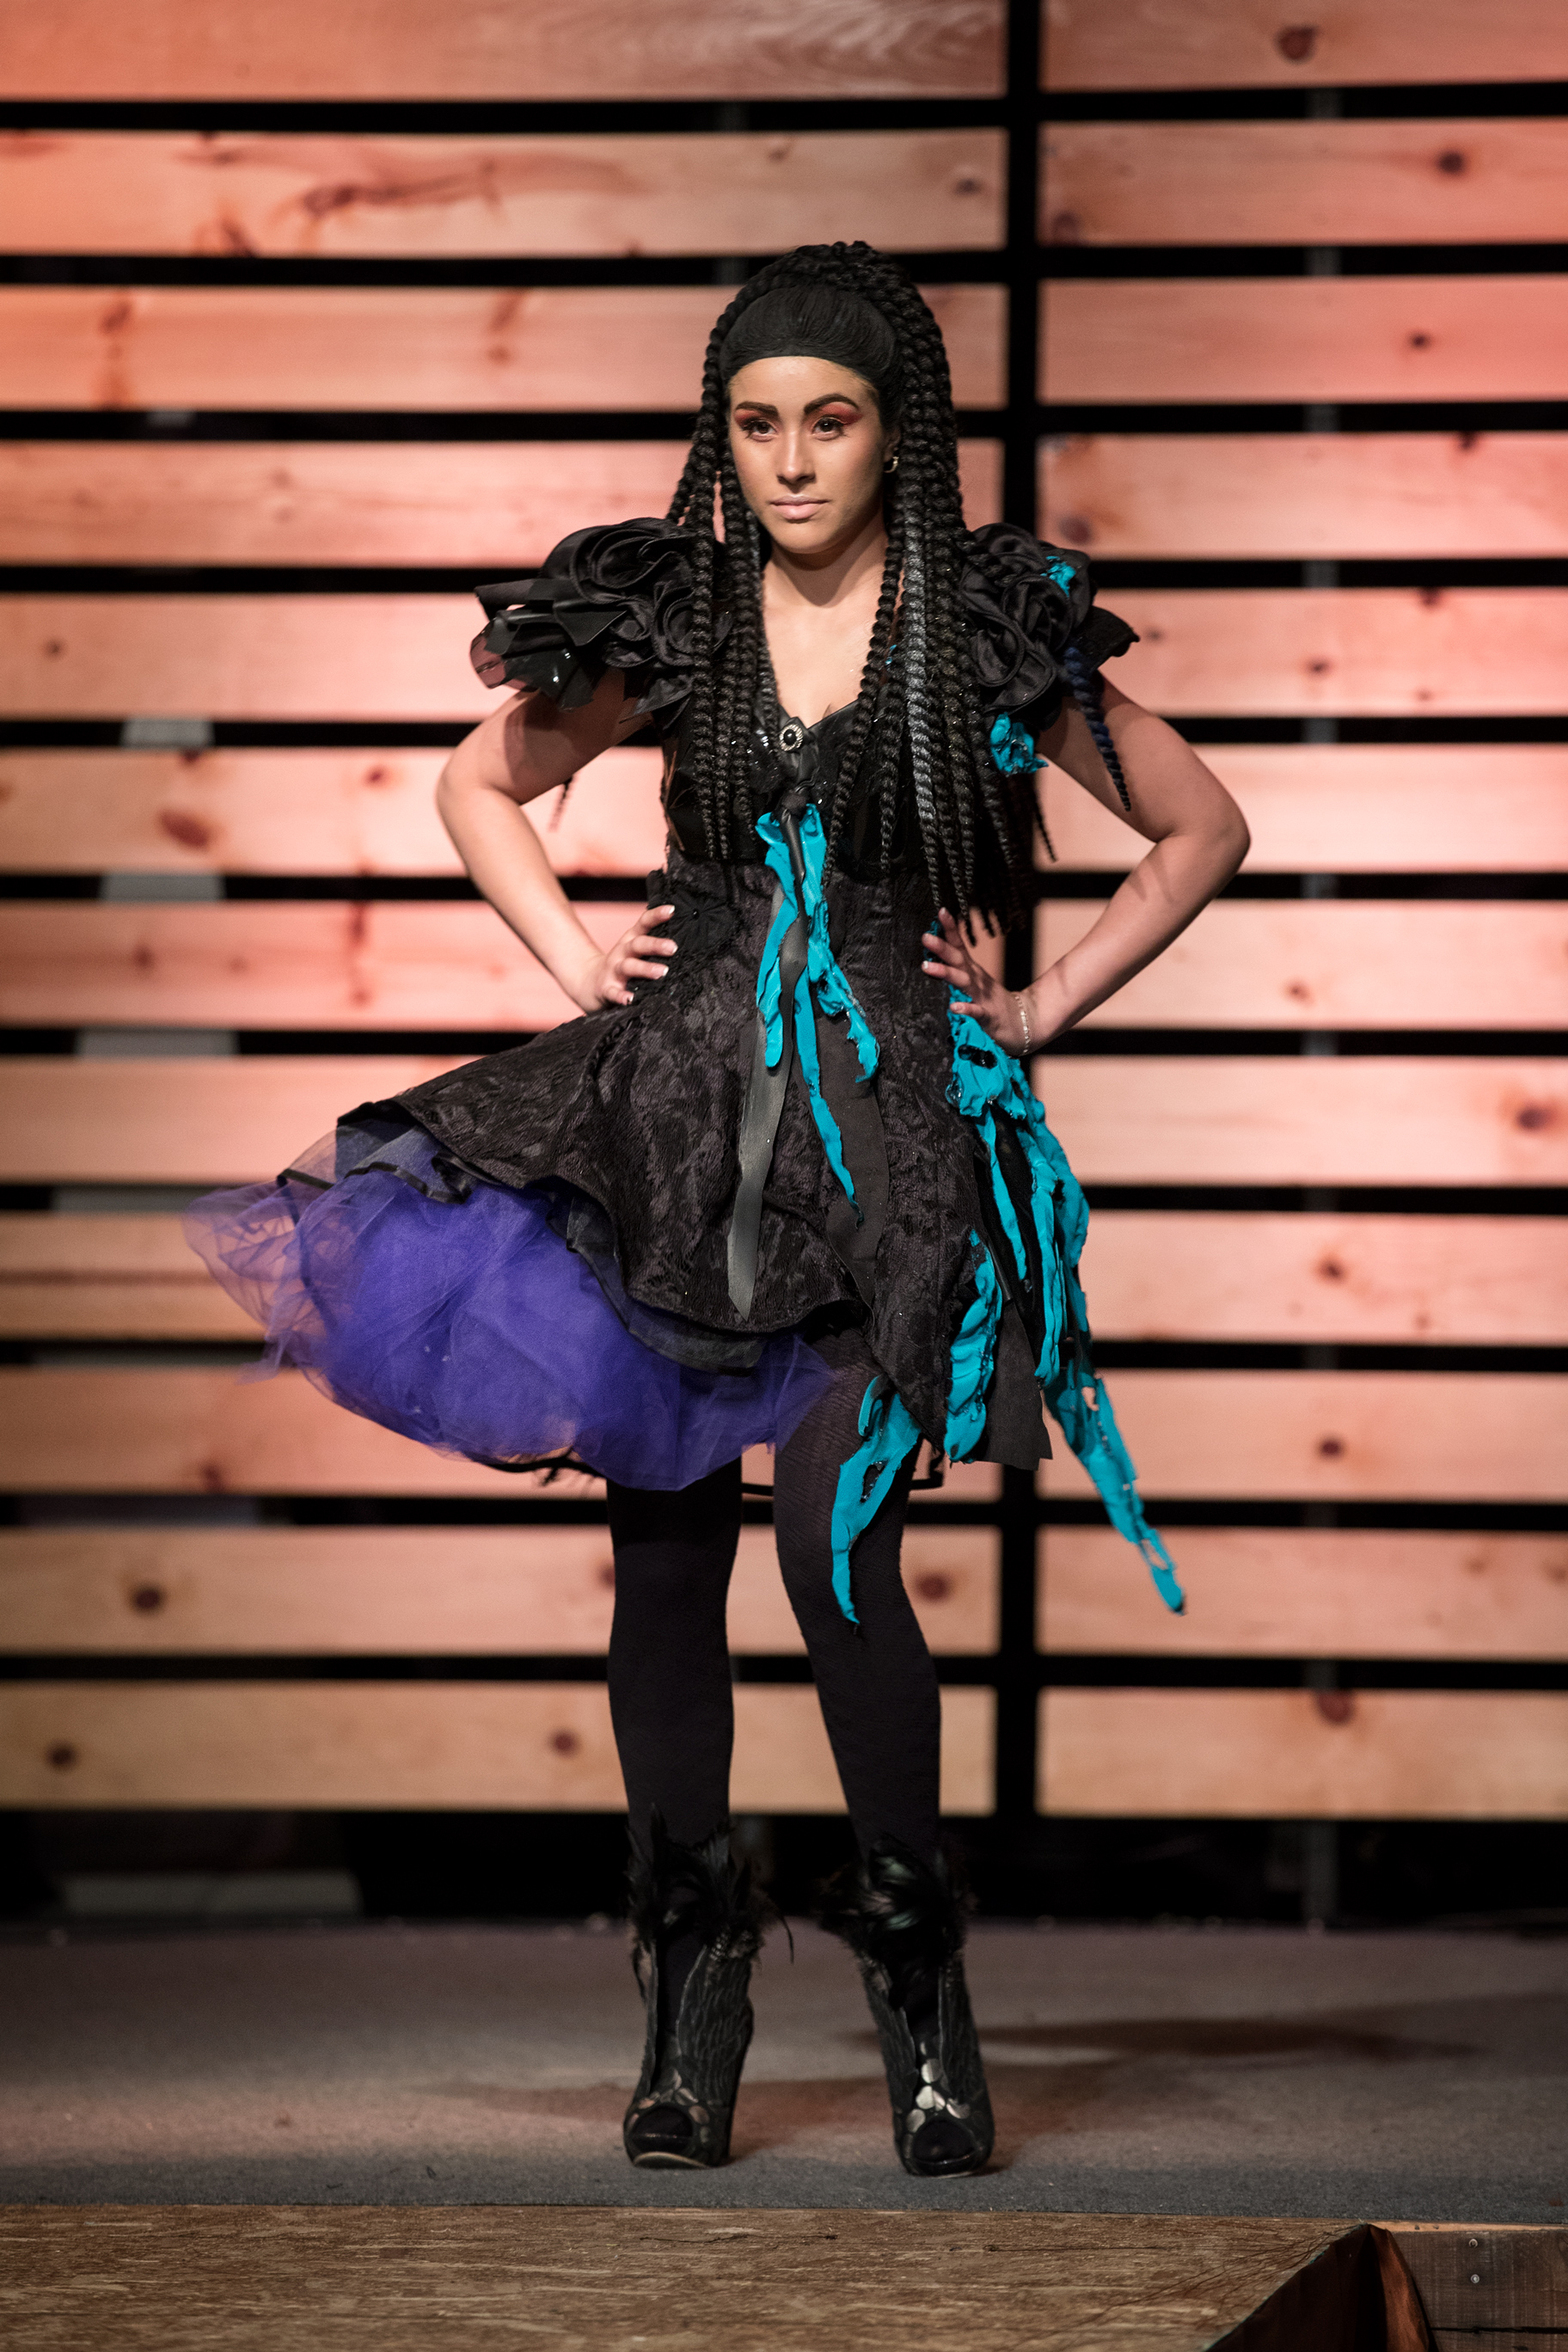 Mission Wear Upcycled Patchwork Fashion Show - 101.jpg